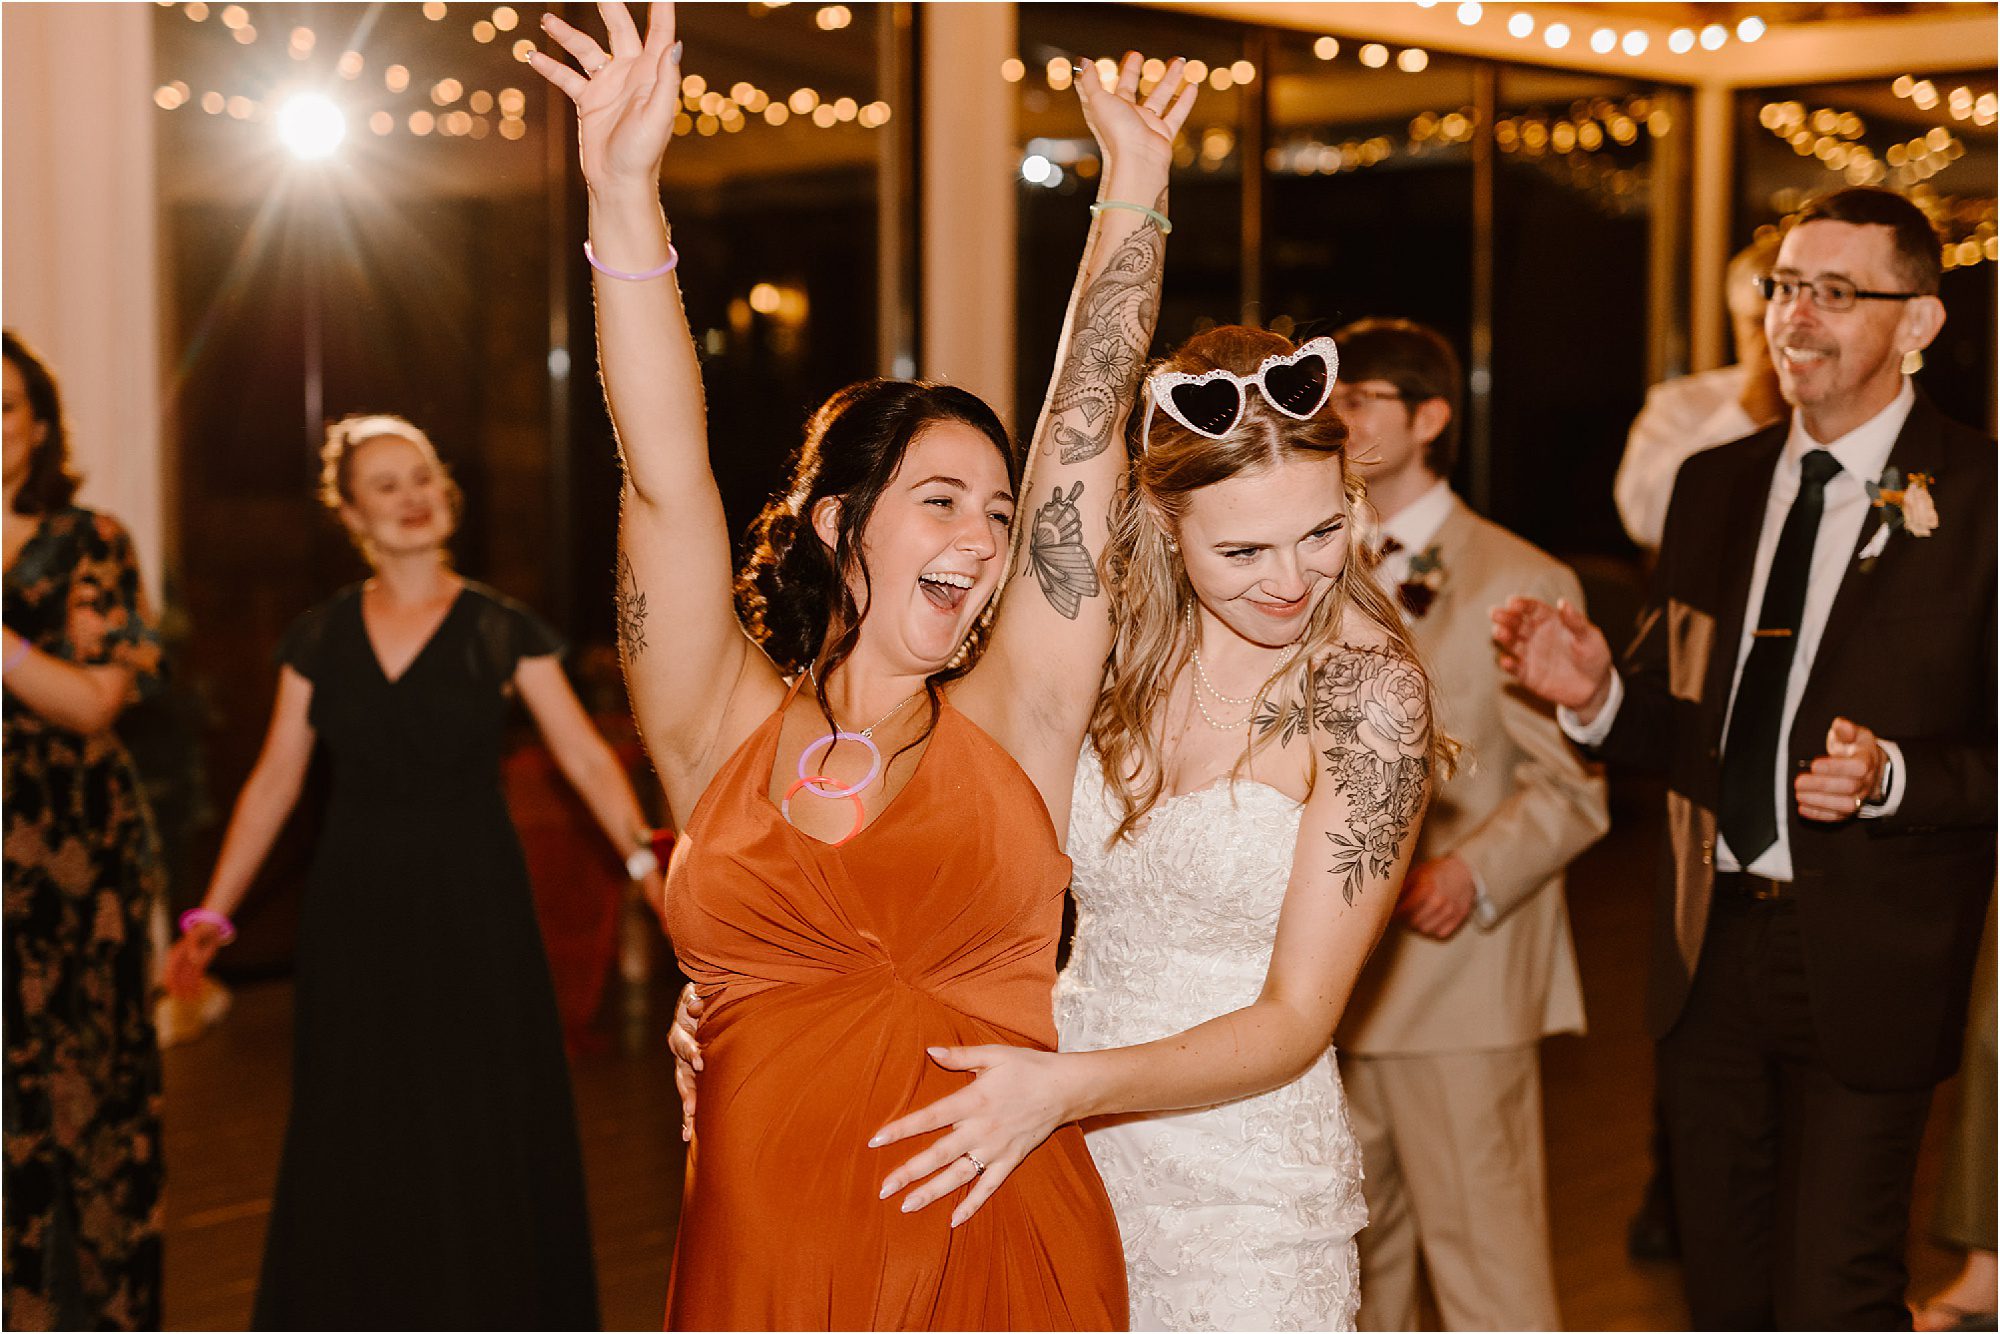 pregnant bridesmaid and bride laughing on dancing floor